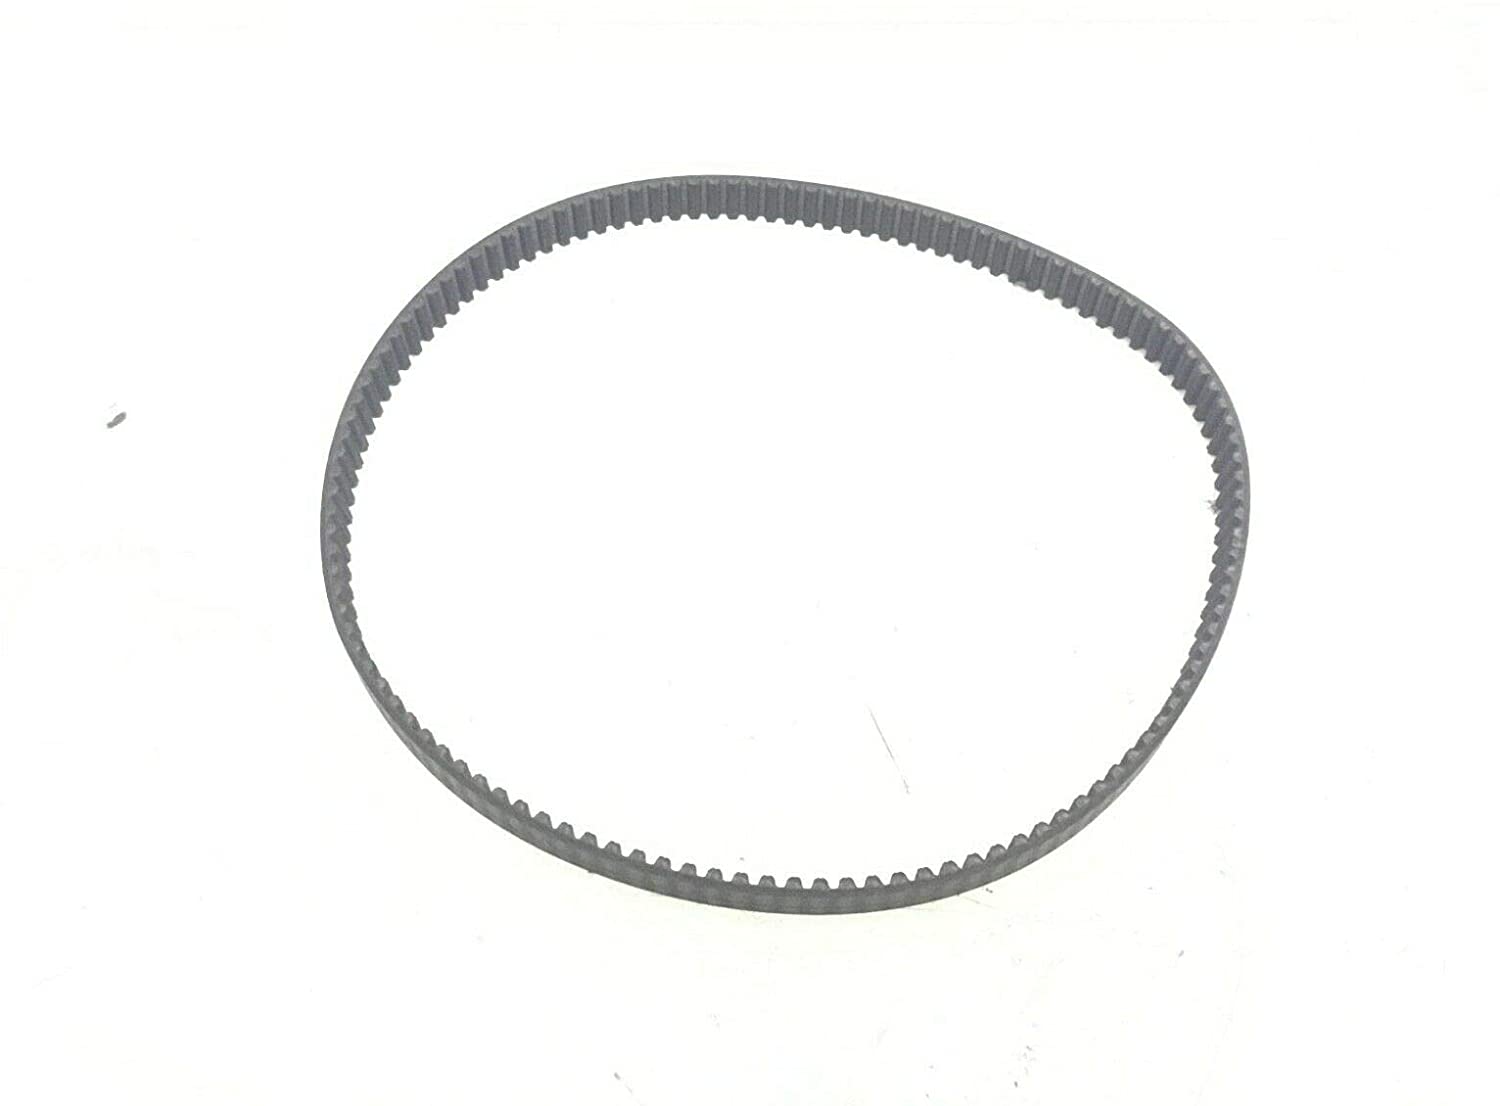 Expresso Fitness Cogged Main Drive Belt 37